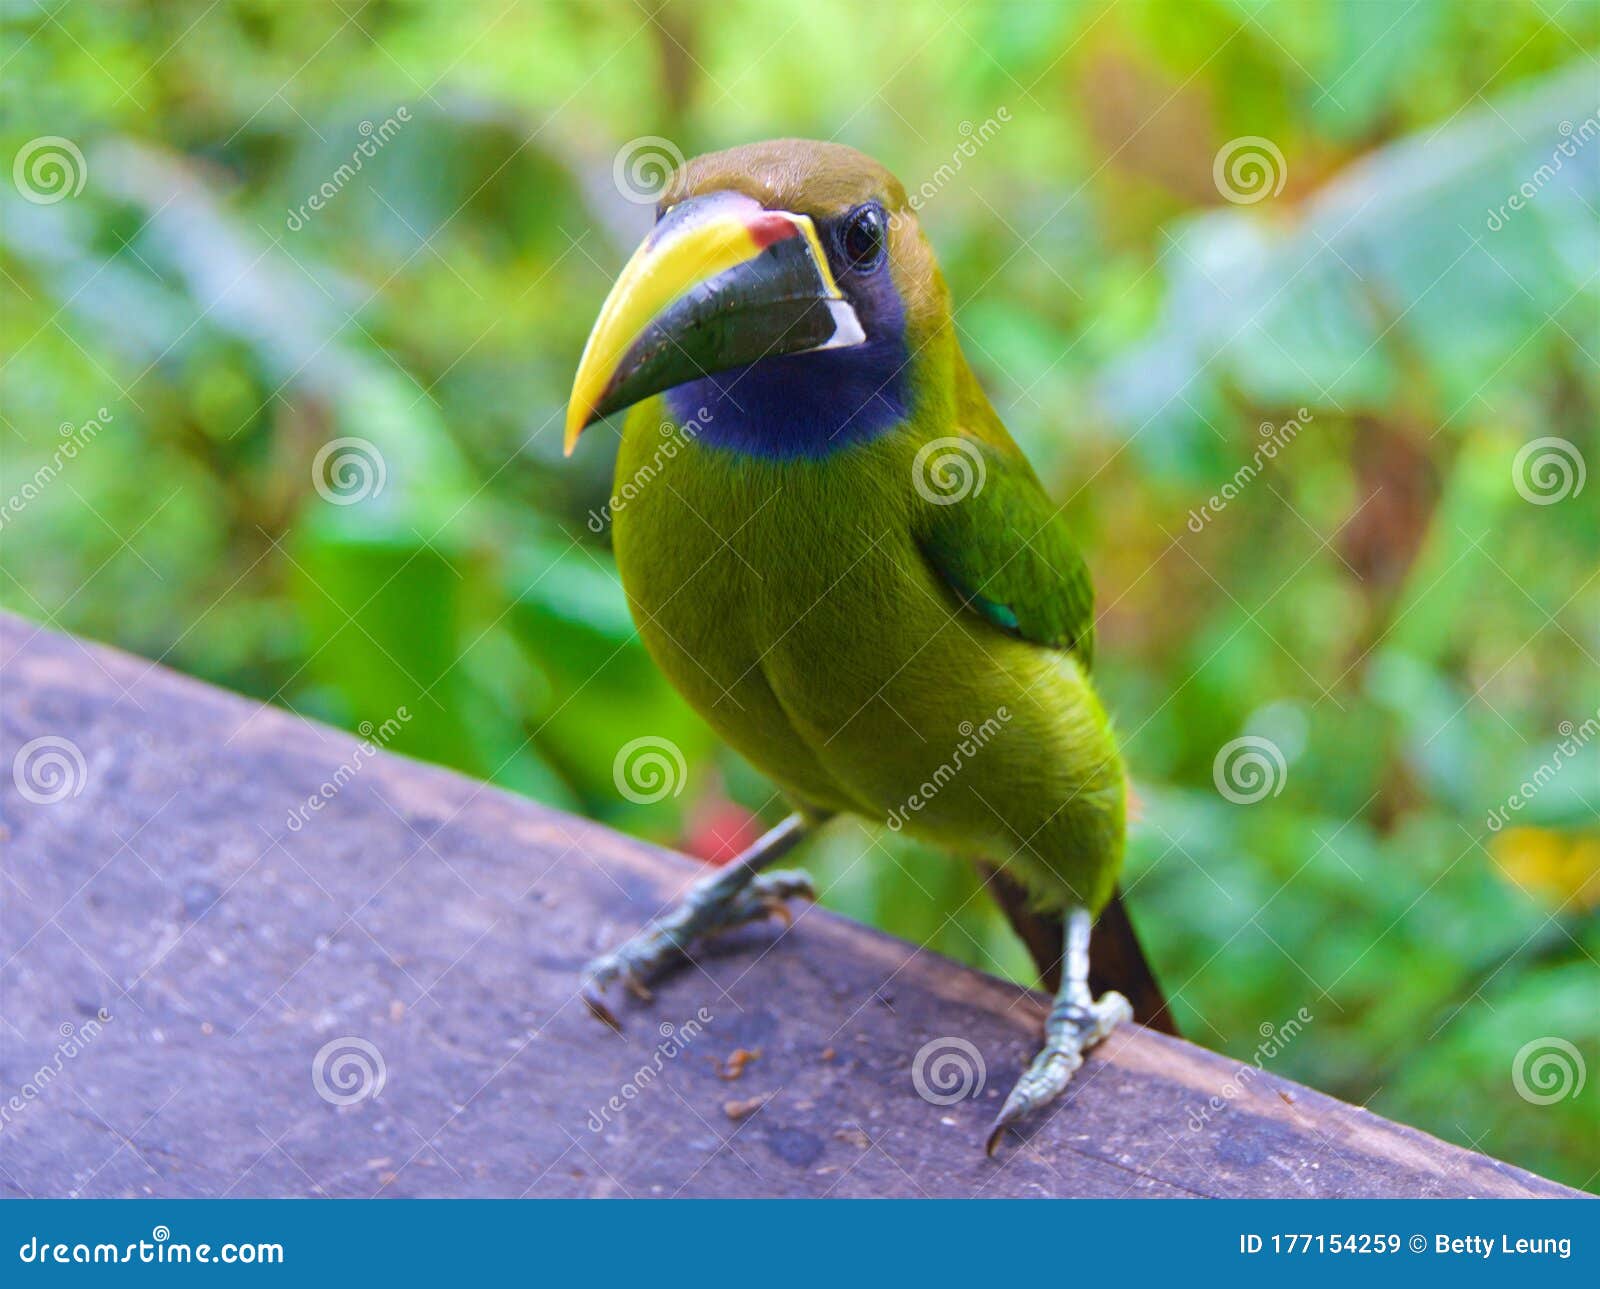 closeup of northern emerald toucanet in the cloud forest in alajuela, costa rica